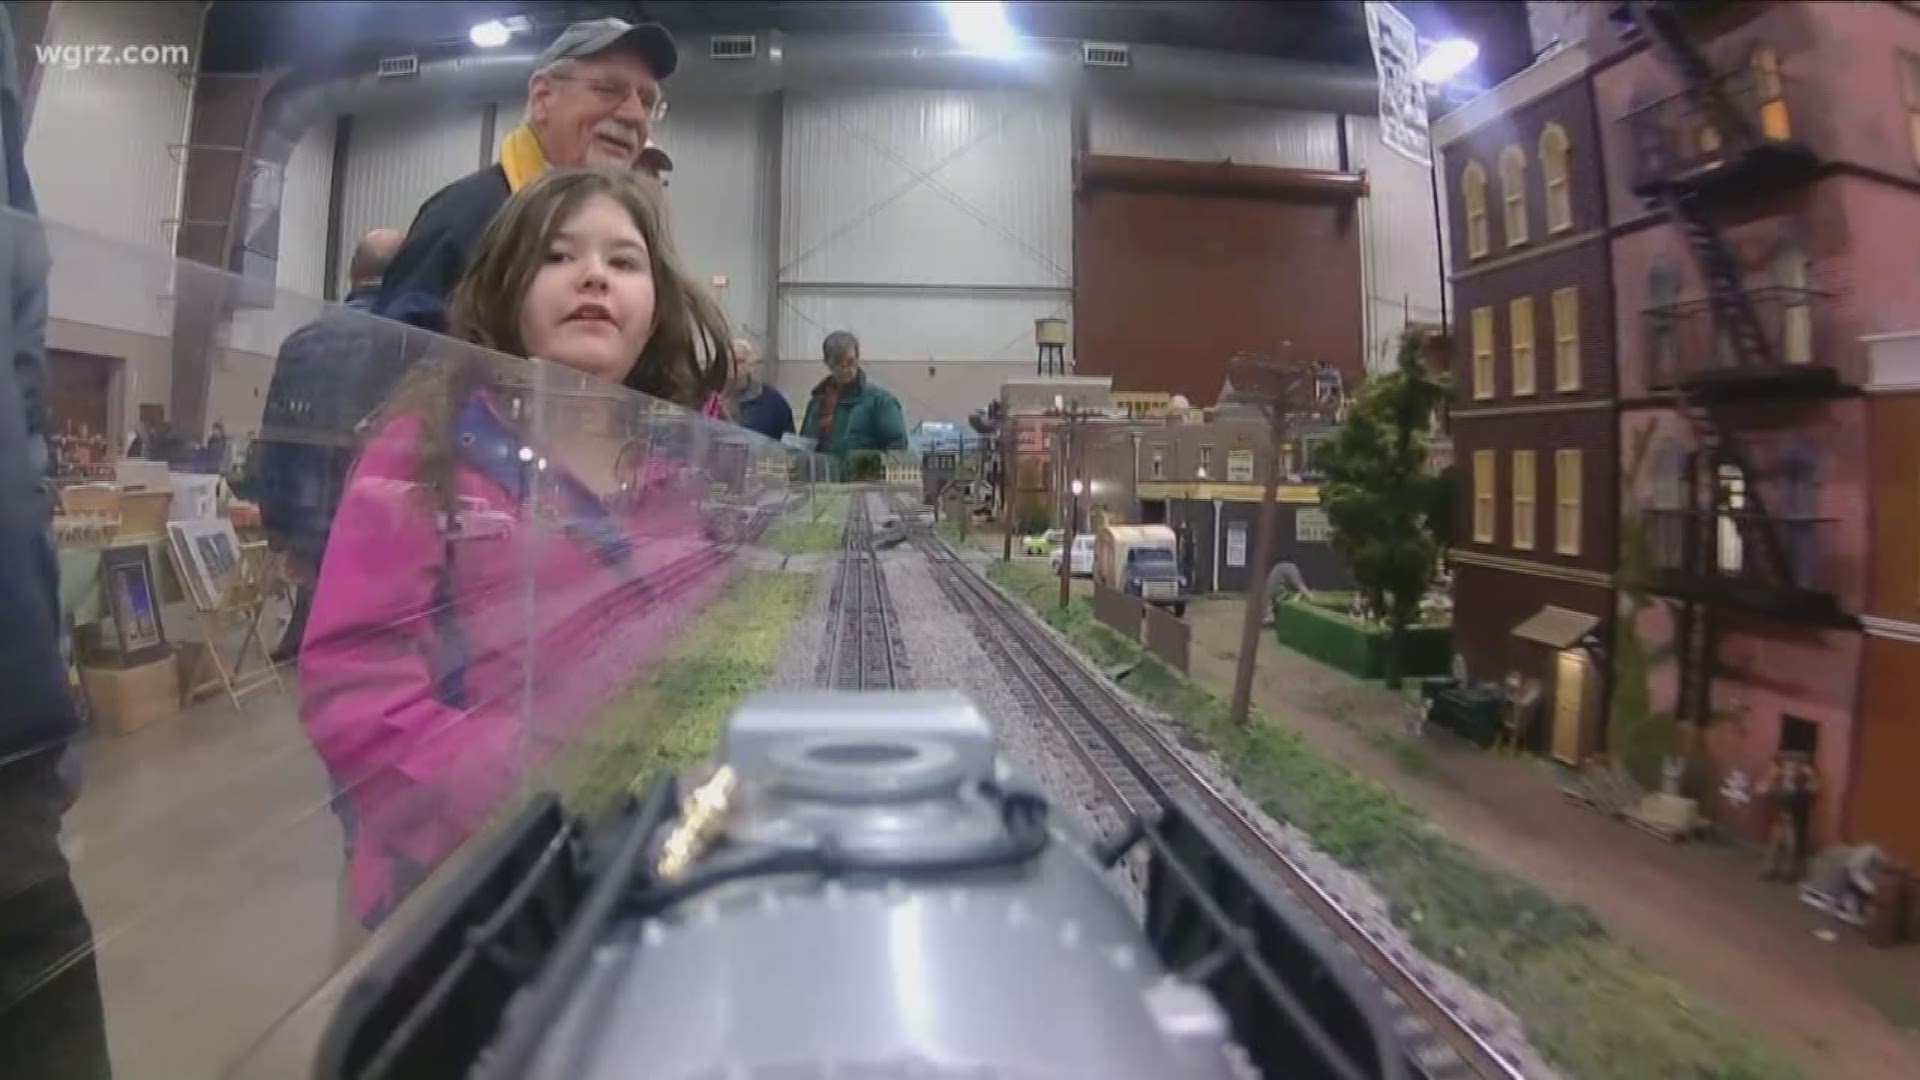 The show of course features many model trains, collectibles, and railroad layouts.The show runs from 10 a.m. until 4 p.m. Sunday.